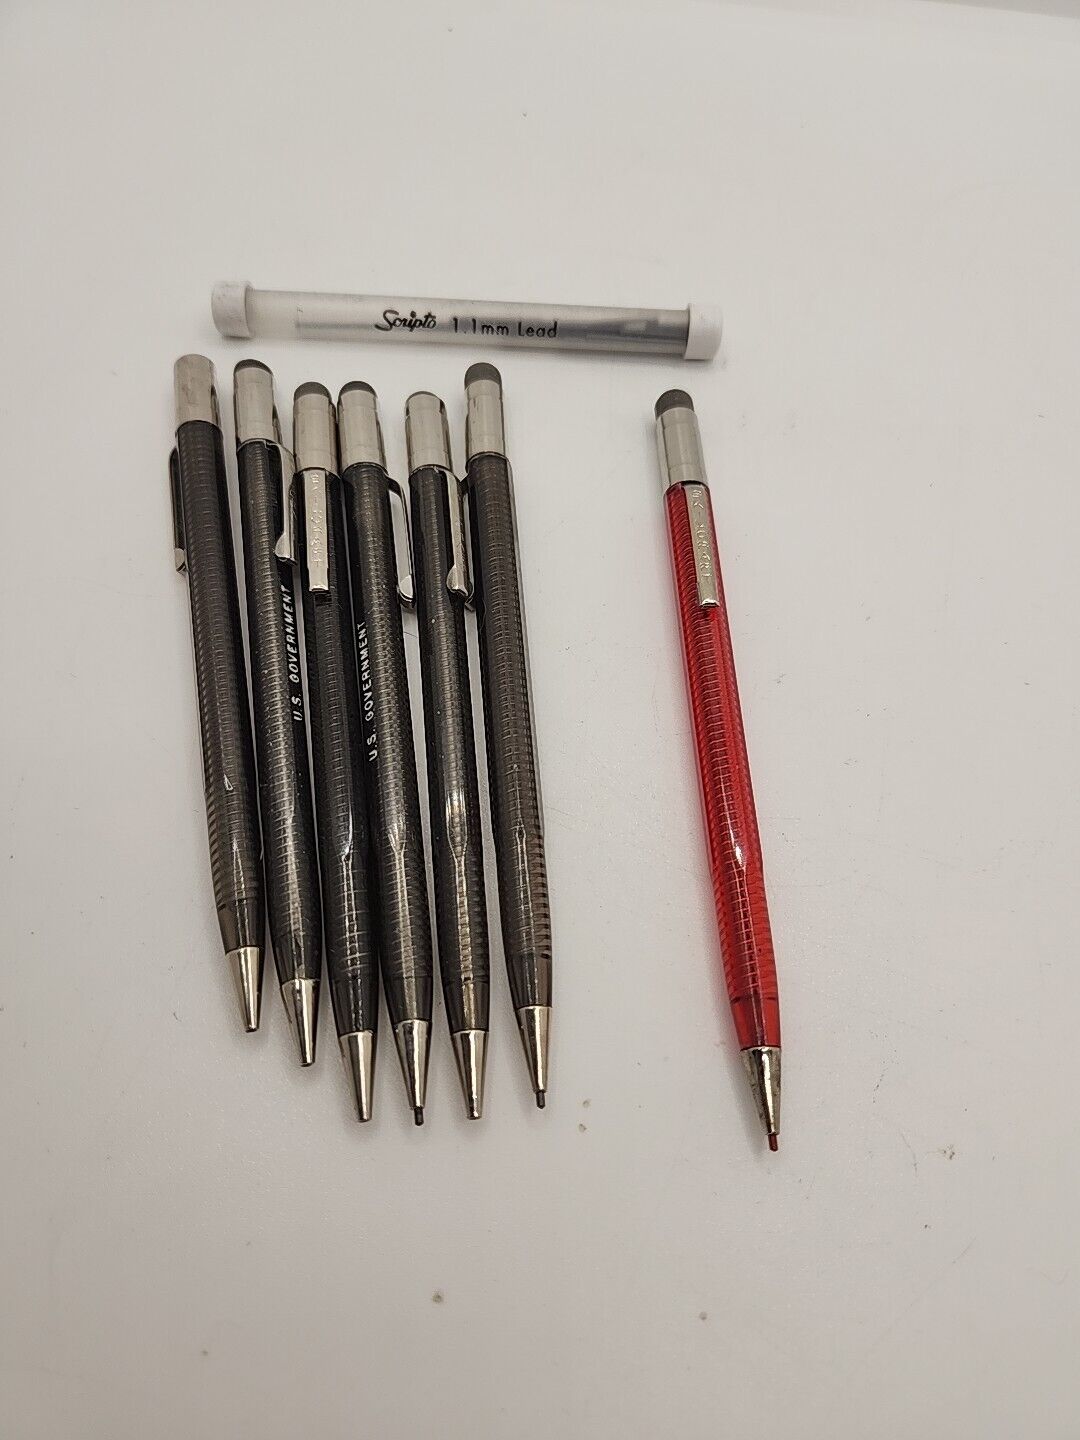 Vintage U.S. Government  Mechanical Pencils Lot Of 7 Skilcraft Red & Gray Leads